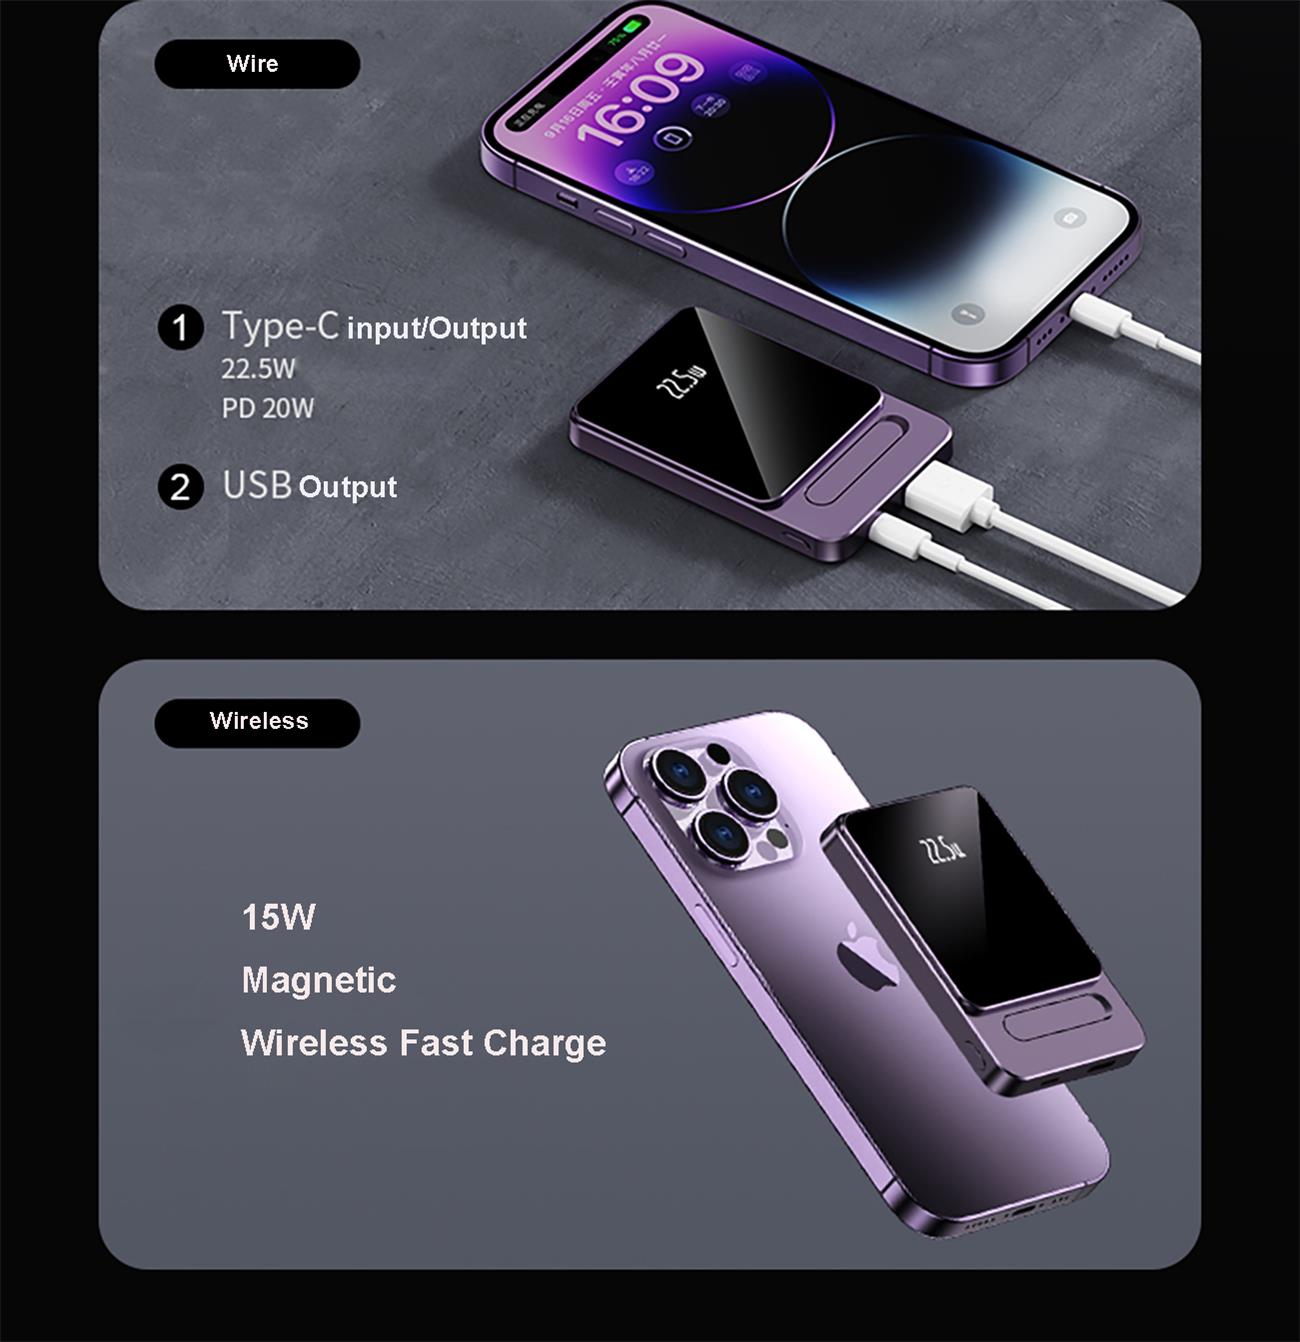 Magnetic Wireless Power Bank Foldable Stand 5000-10000 Mah